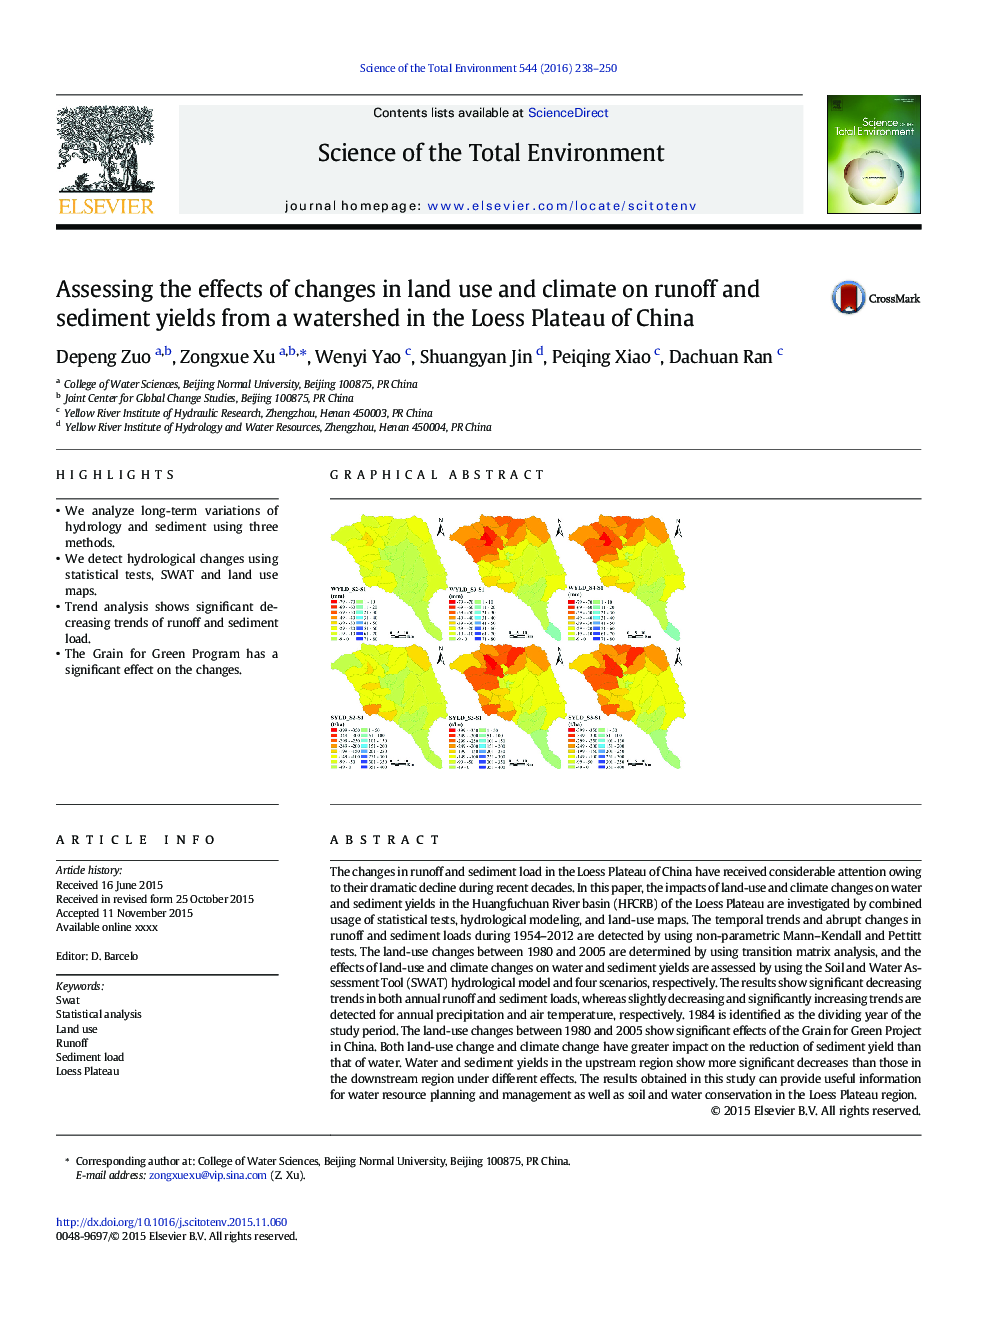 Assessing the effects of changes in land use and climate on runoff and sediment yields from a watershed in the Loess Plateau of China